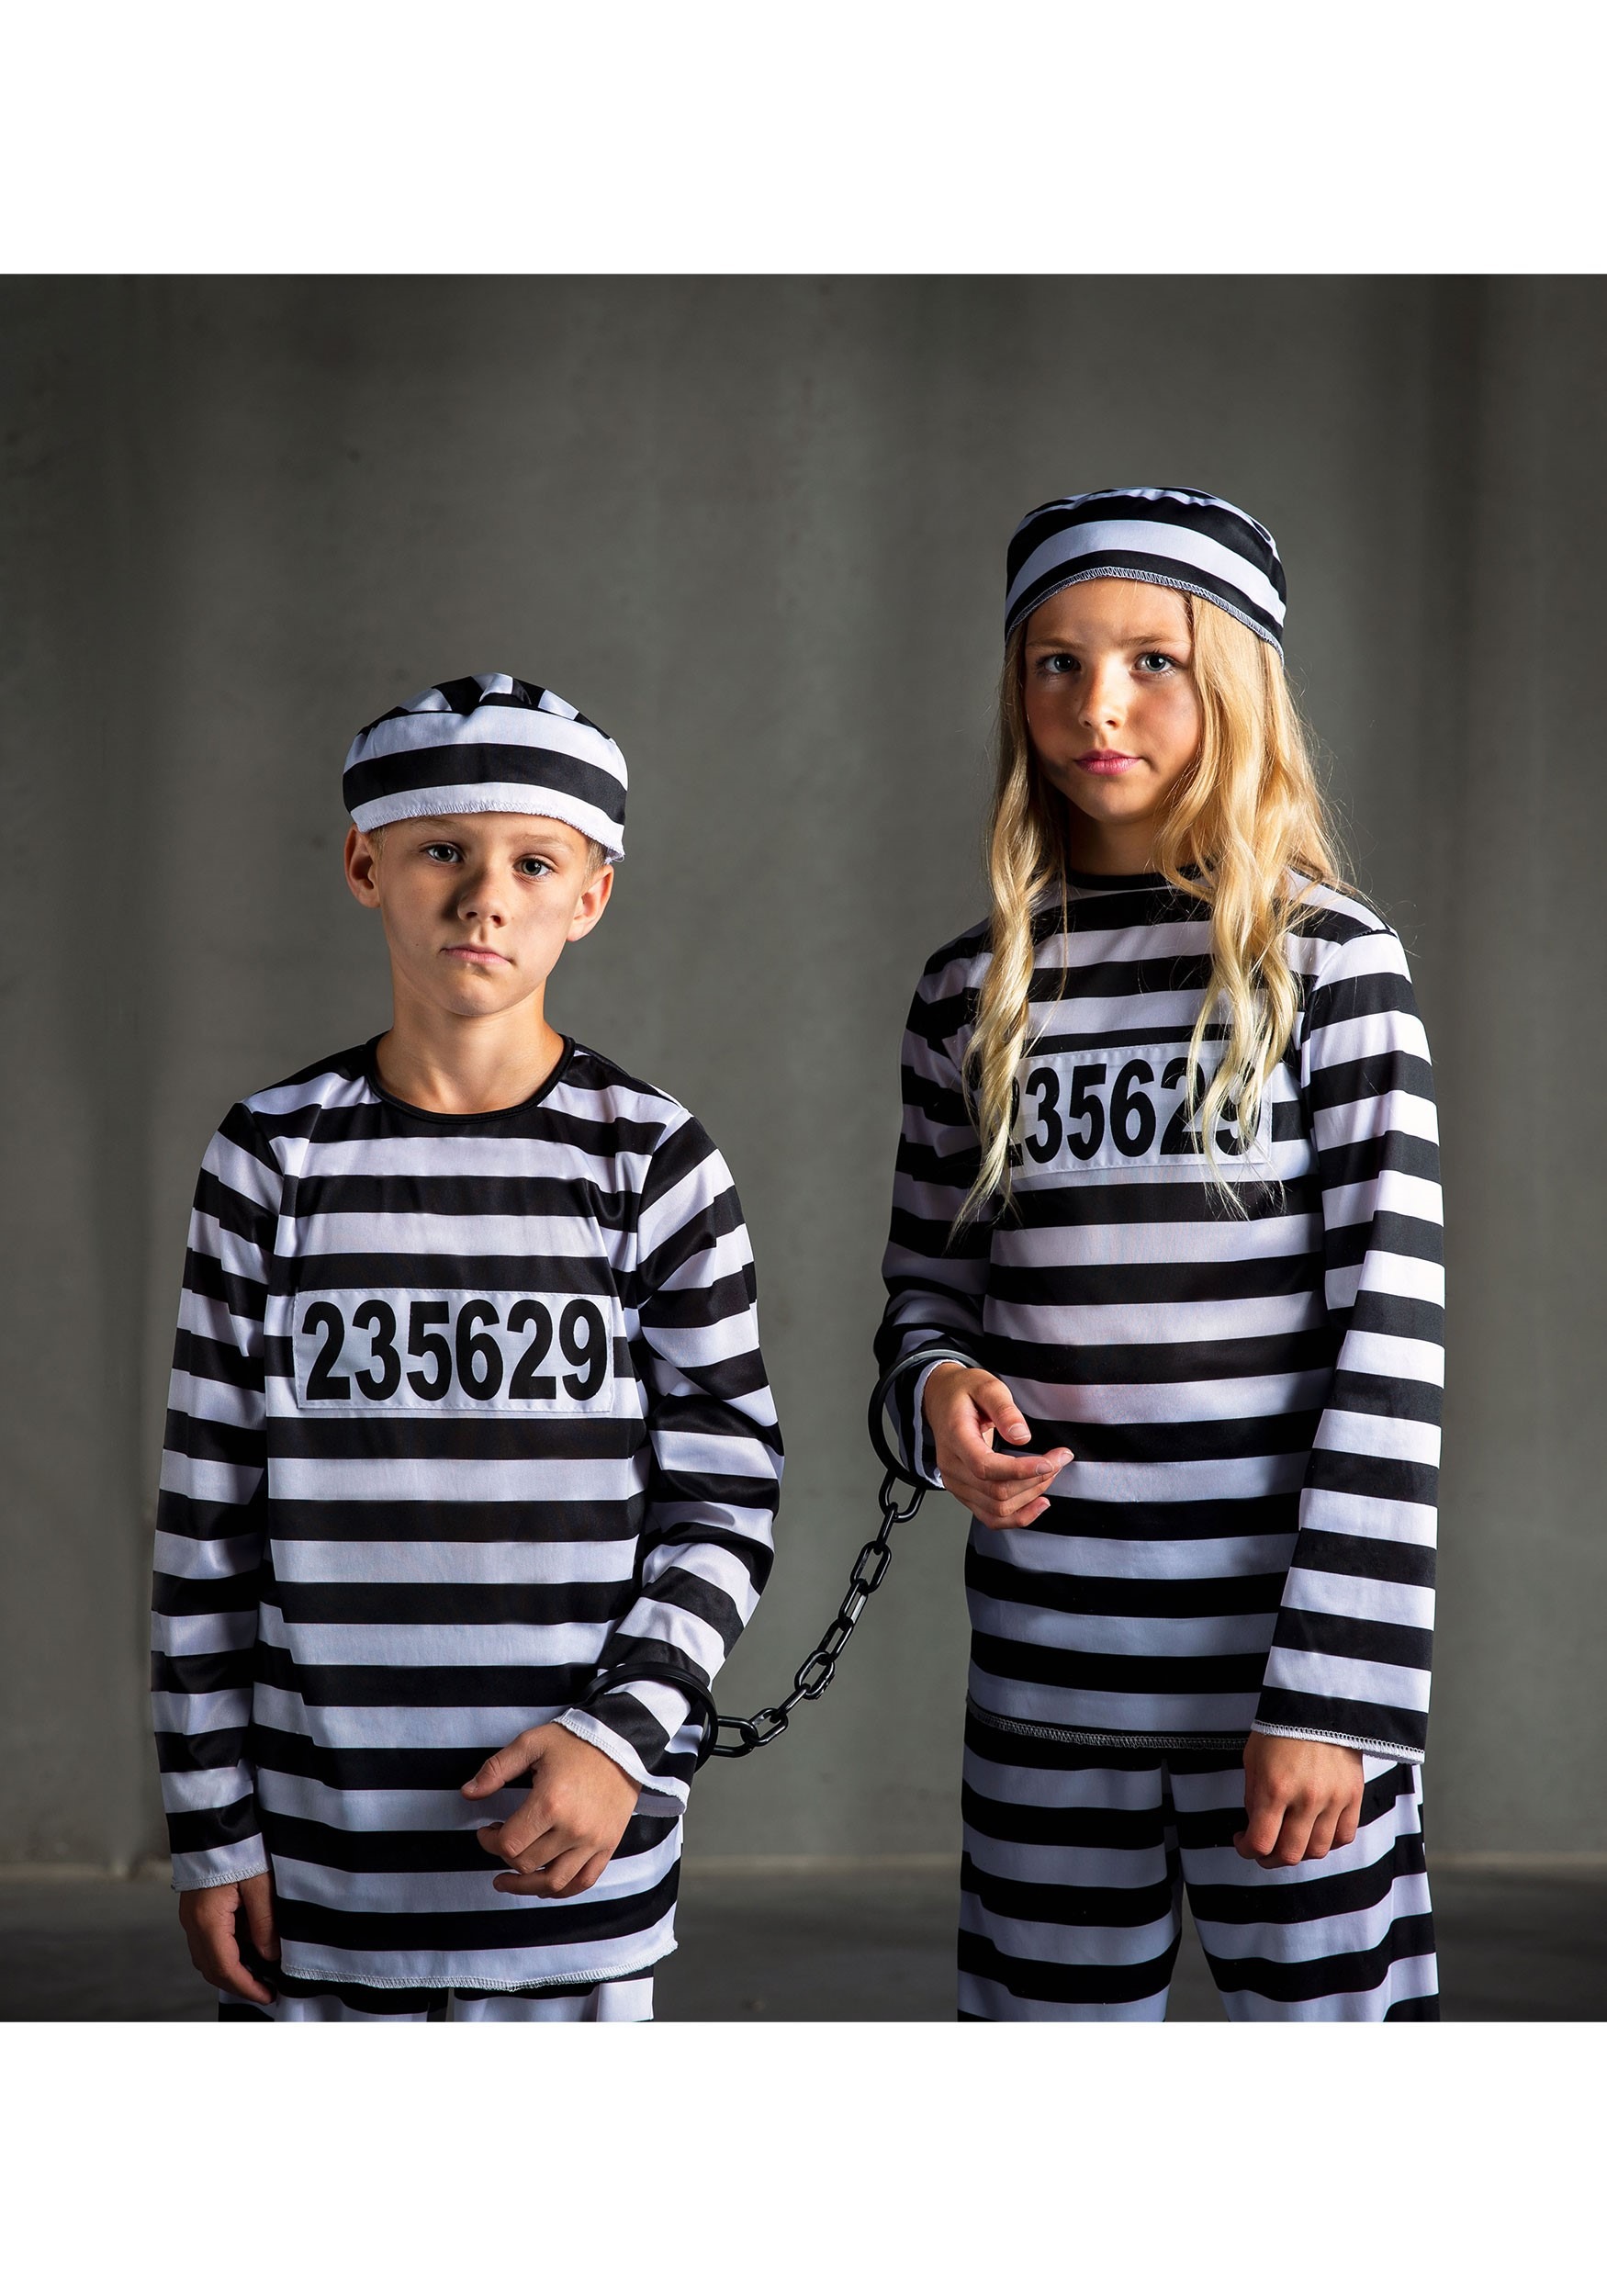 Kids Age 12-13 Prisoner T-Shirt Convict Cops Robbers Fancy Dress Inmate Child 